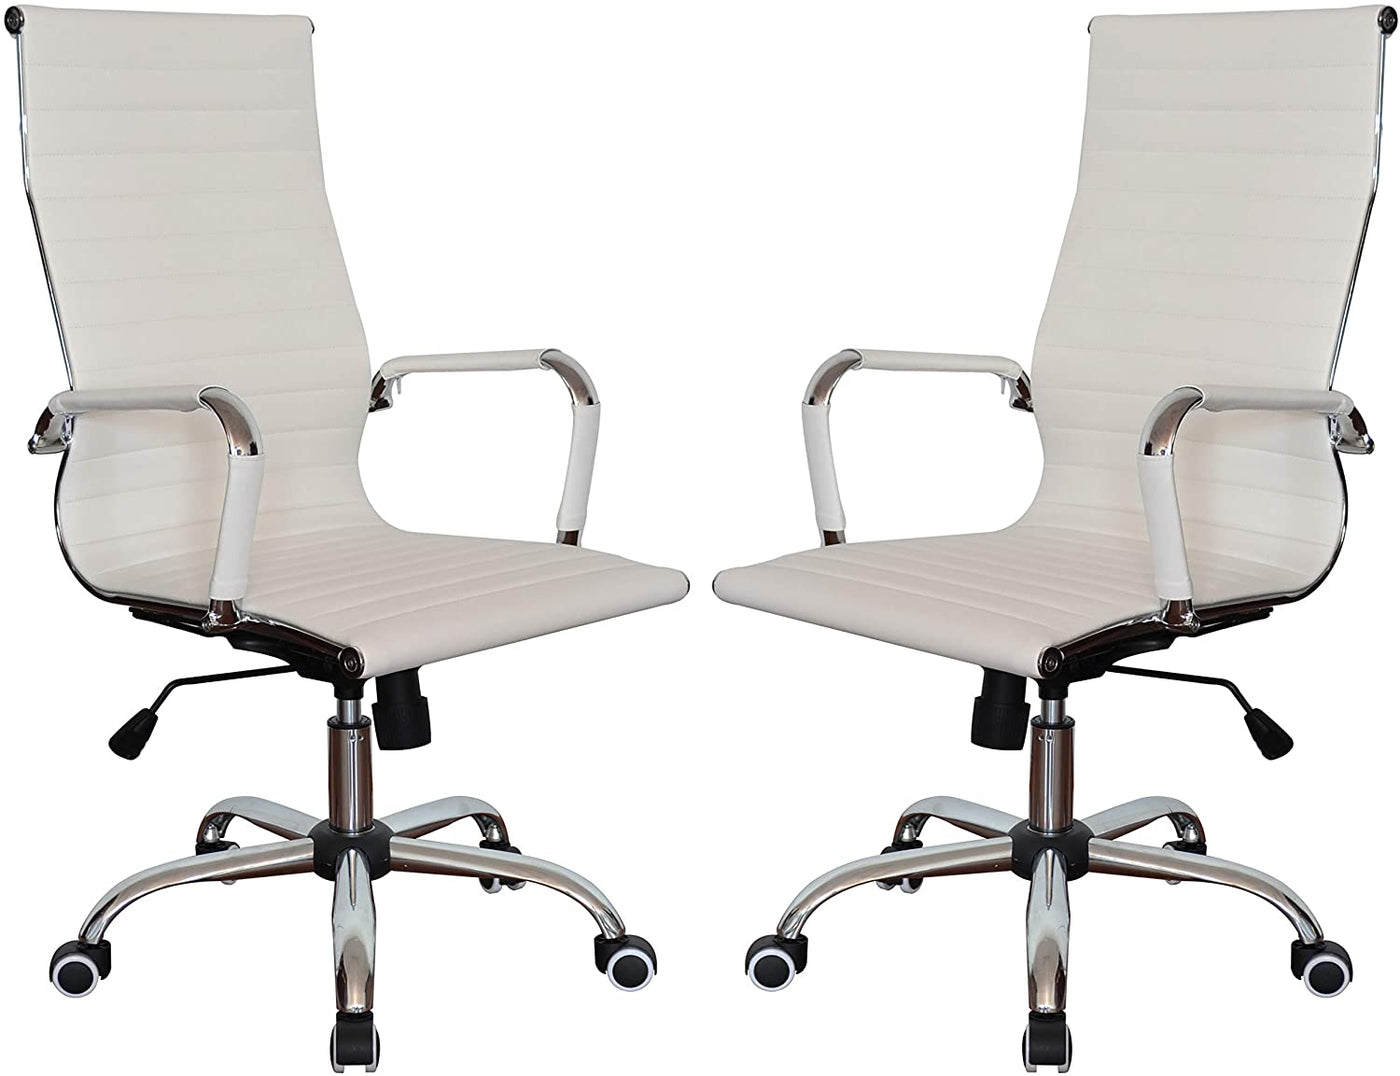 Executive Leather Office Chair, Office Posture Chair